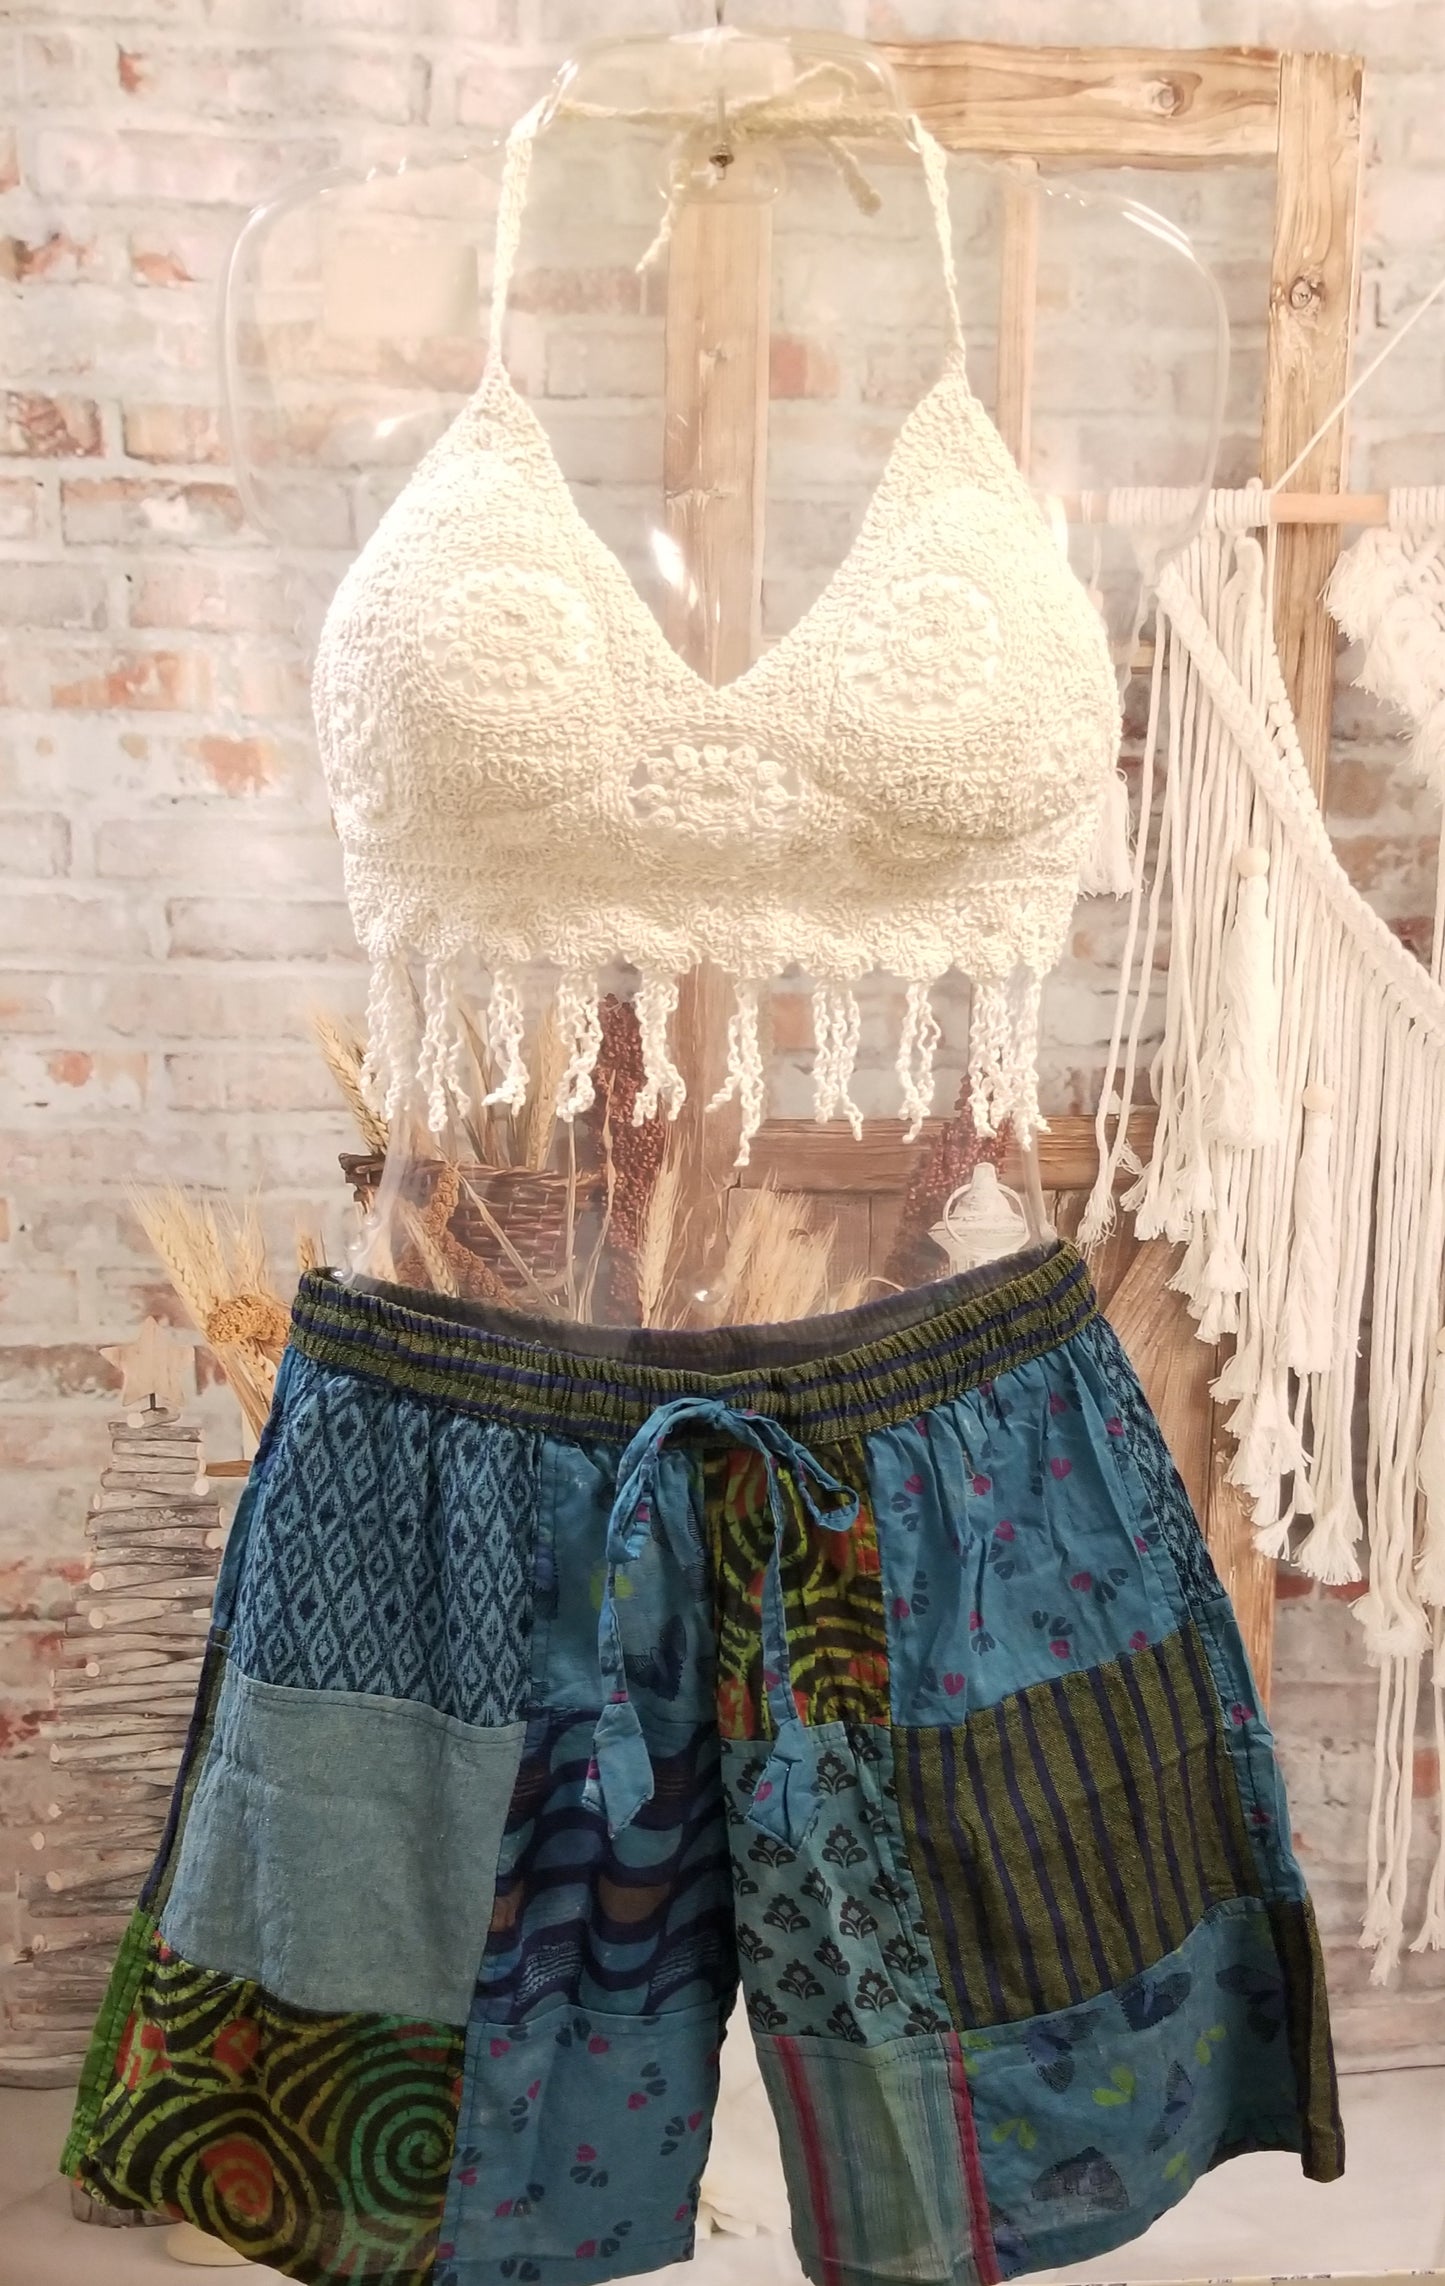 short crochet halter top with fringe shown with blue patchwork shorts